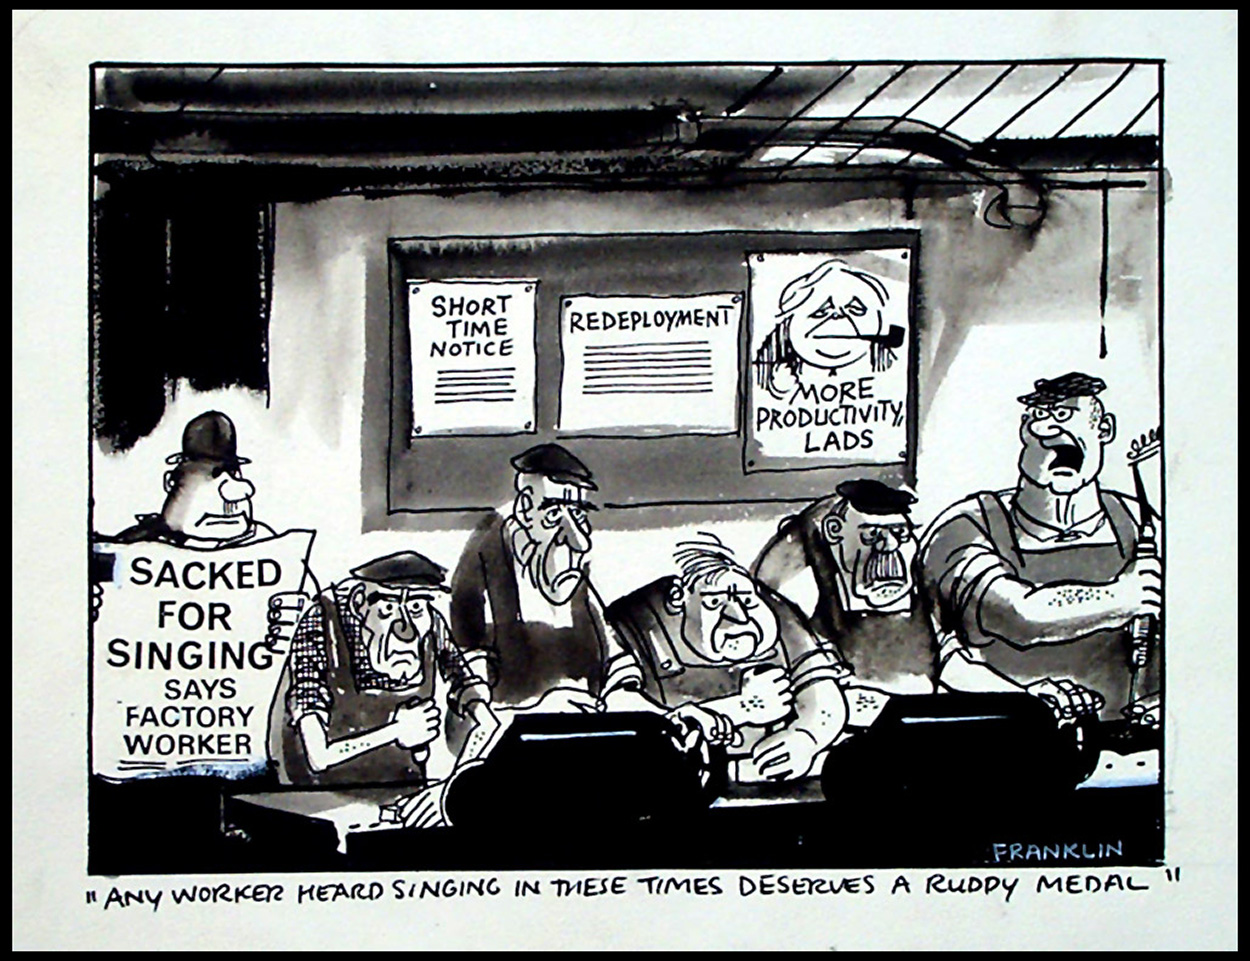 Sacked for Singing (Original) (Signed) art by Stanley Arthur Franklin at The Illustration Art Gallery